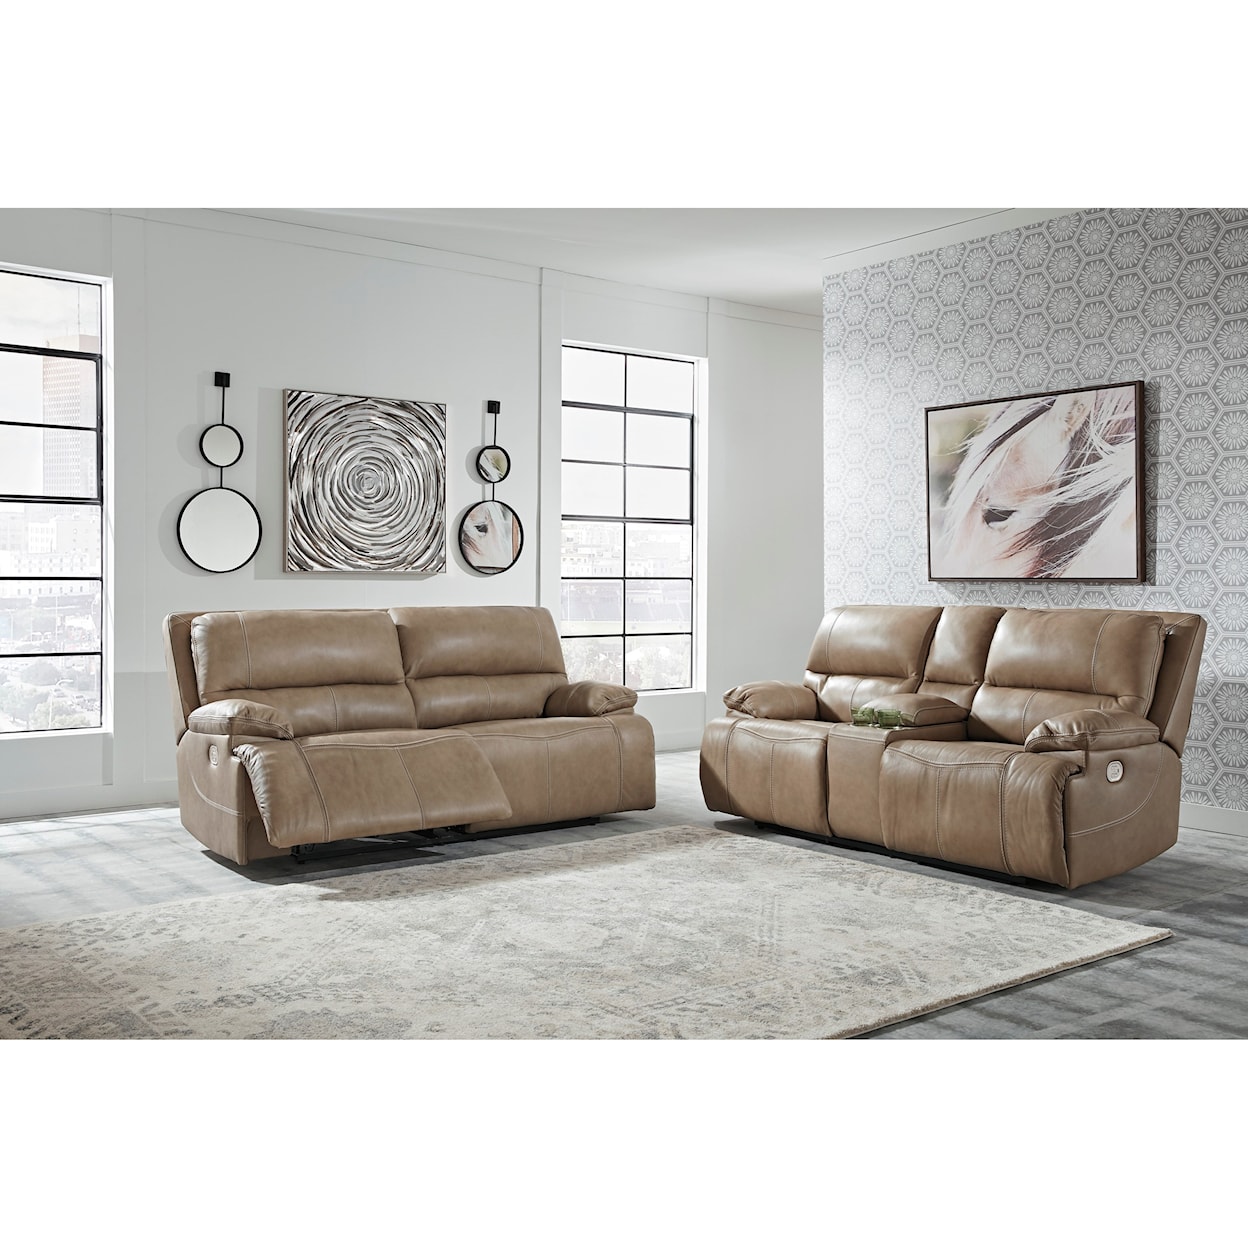 Signature Design by Ashley Furniture Ricmen Power Reclining Living Room Group